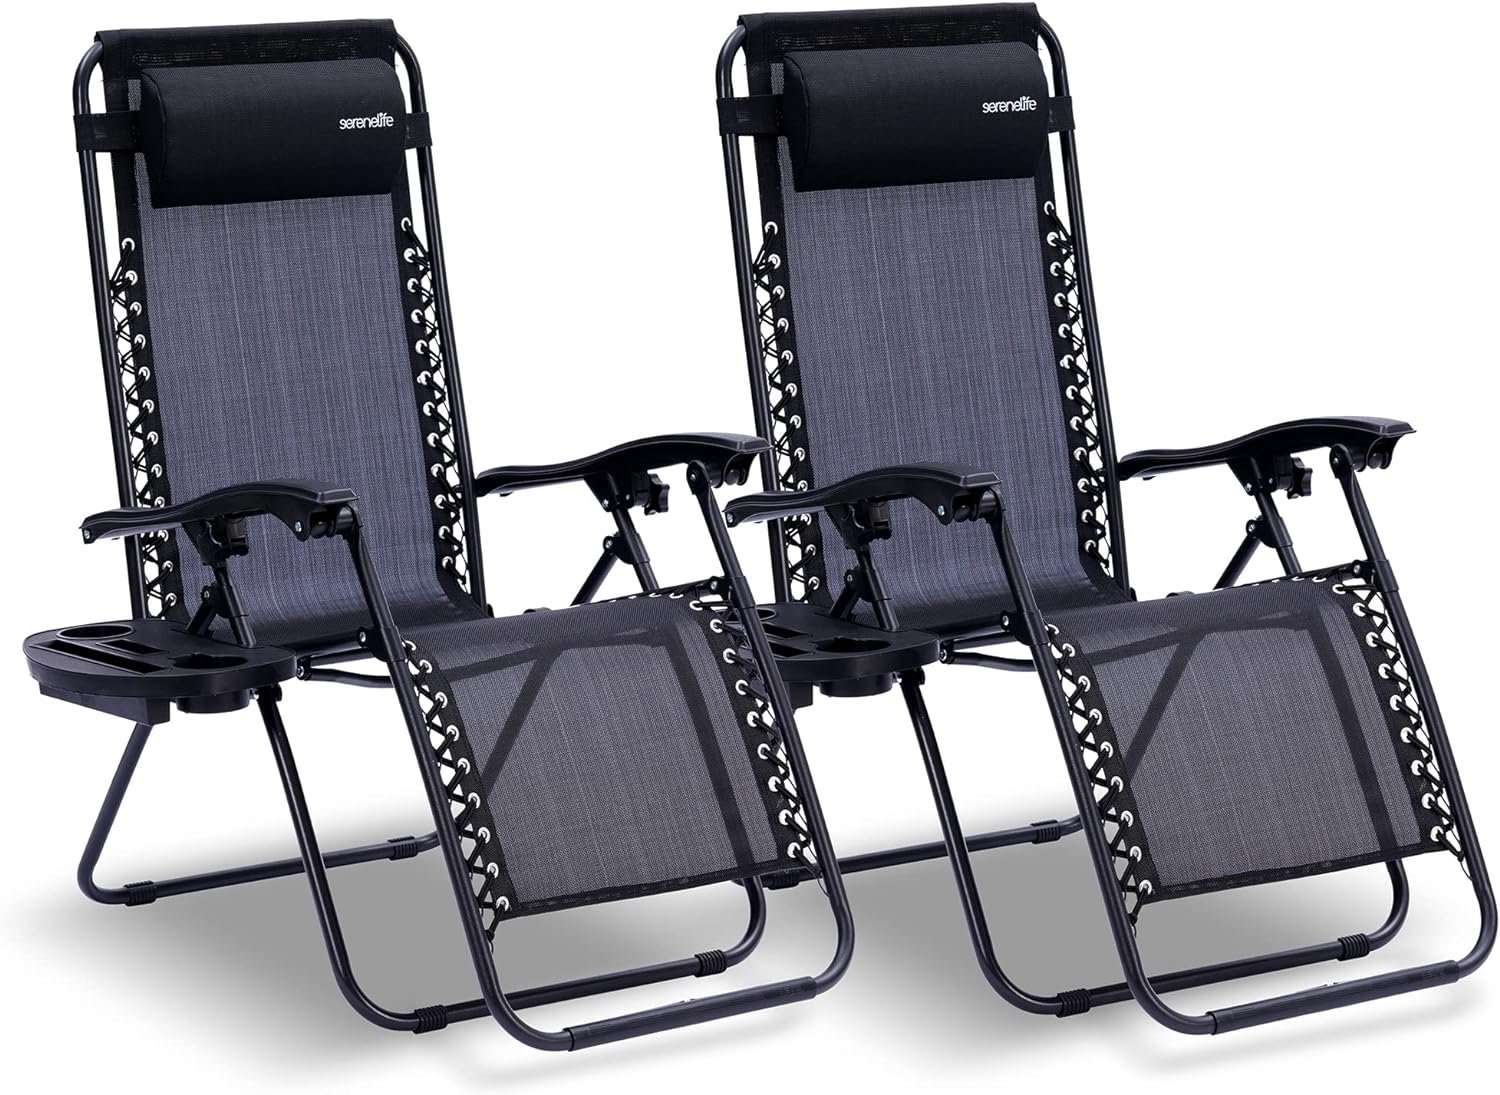 SereneLife Zero Gravity Lounge Chair Review